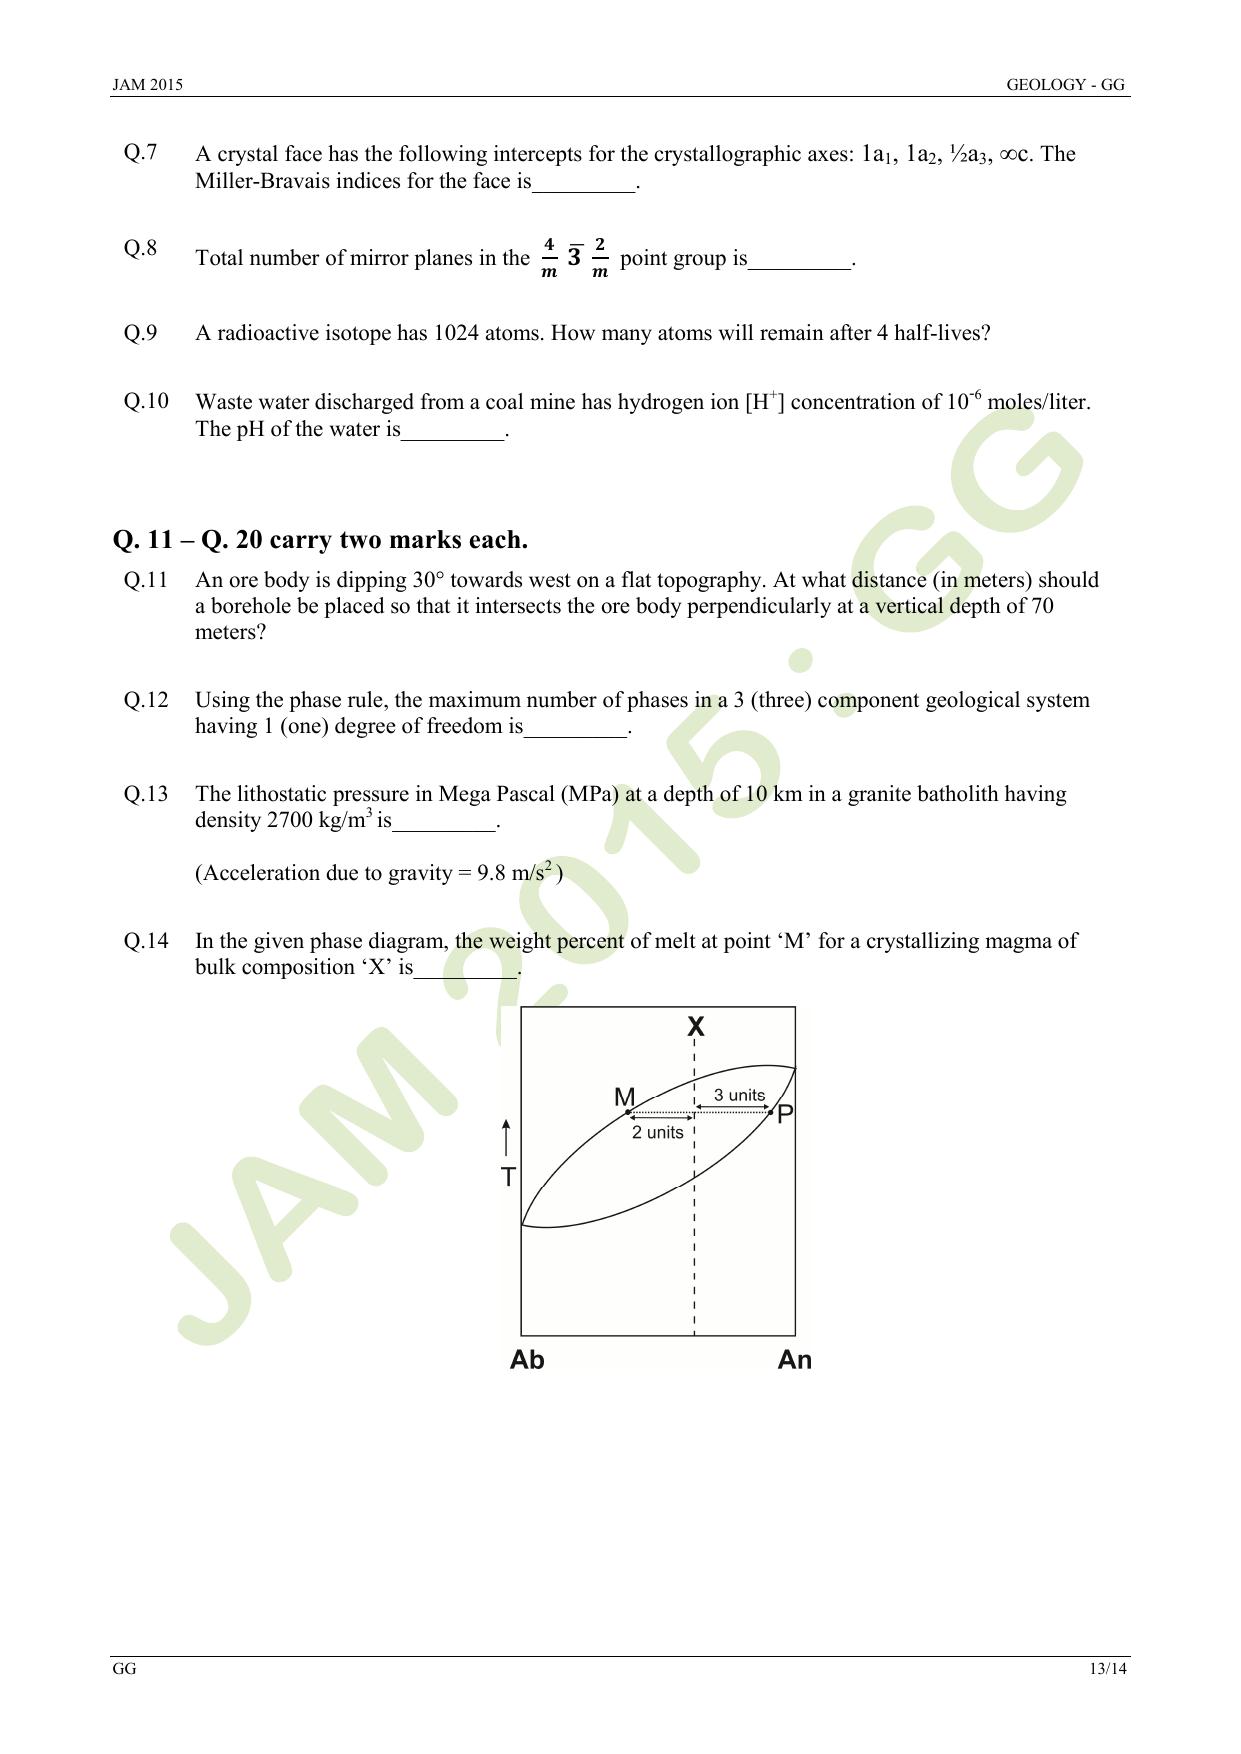 JAM 2015: GG Question Paper - Page 13